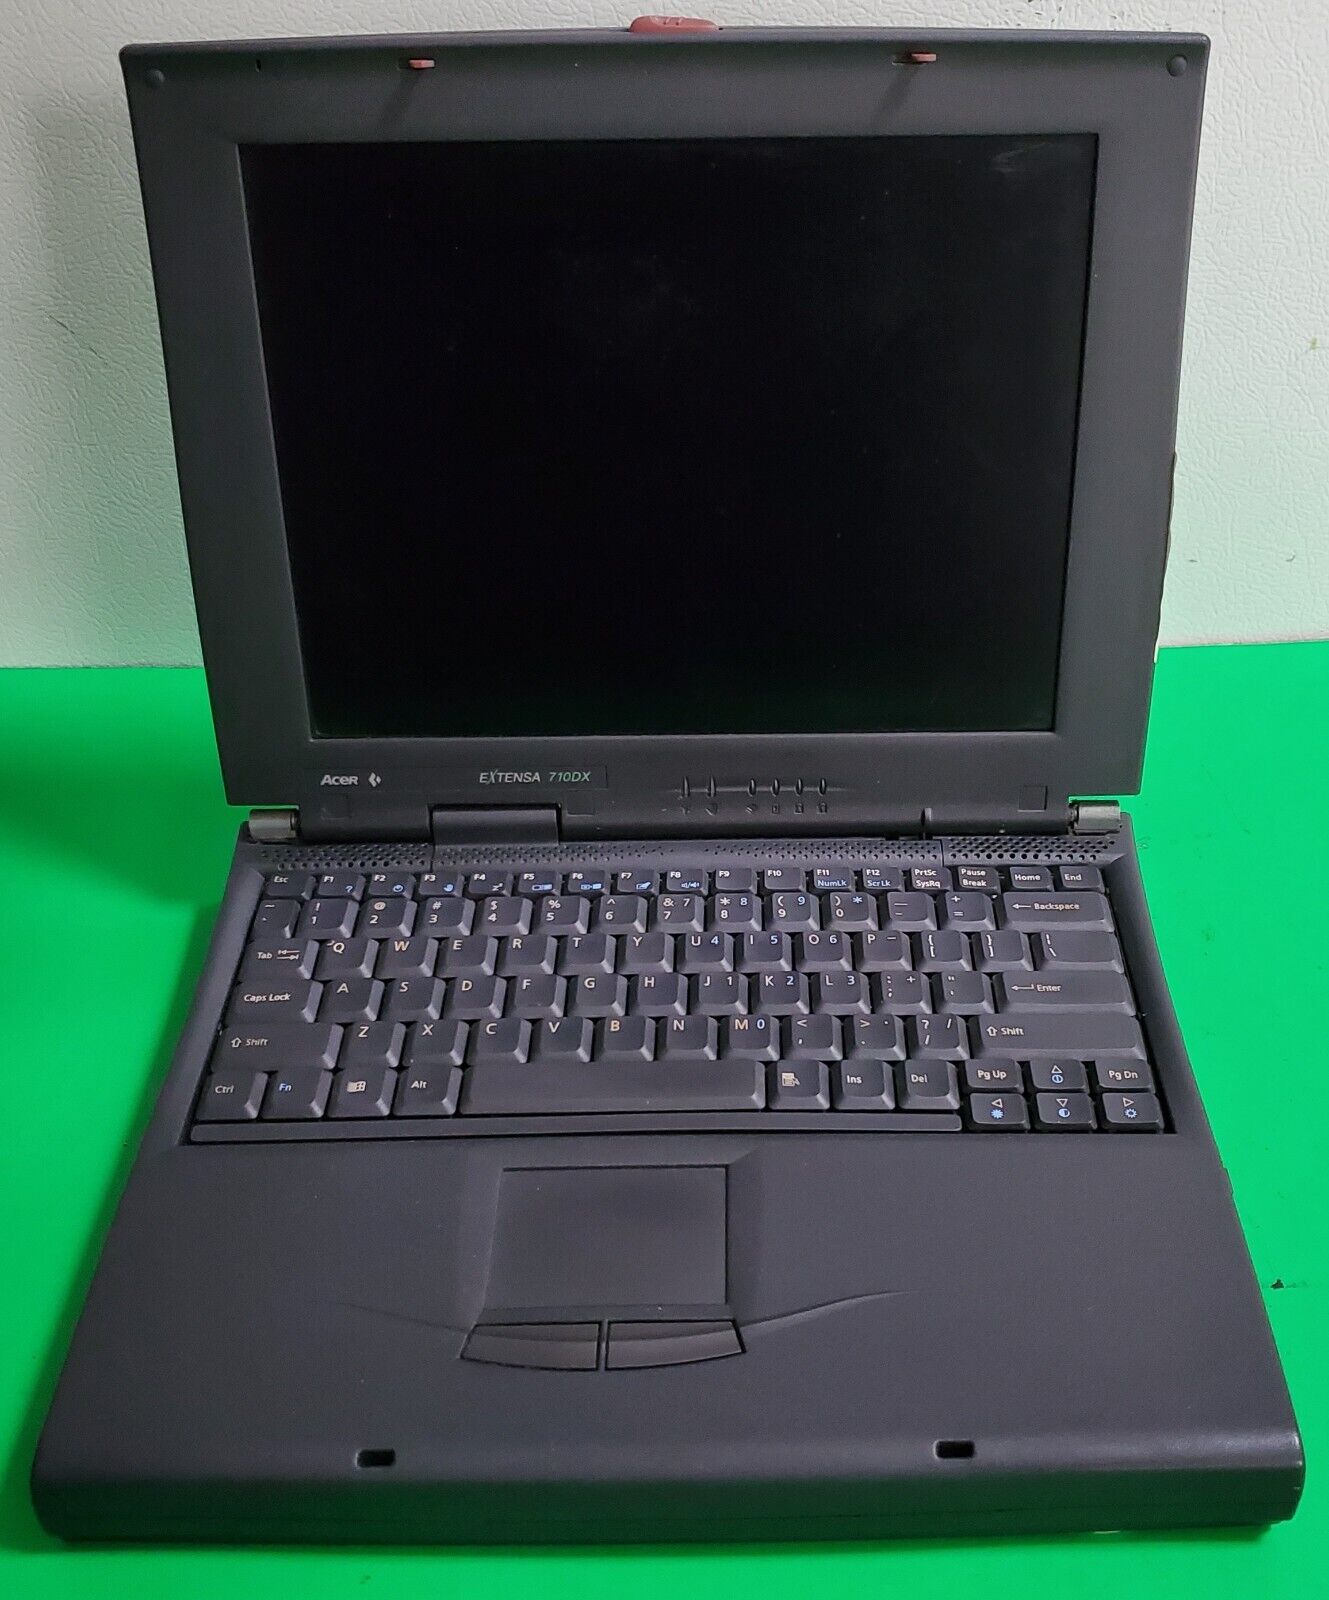 Acer Extensa 710DX Model 700 Notebook Laptop Computer Vintage Rare - as is